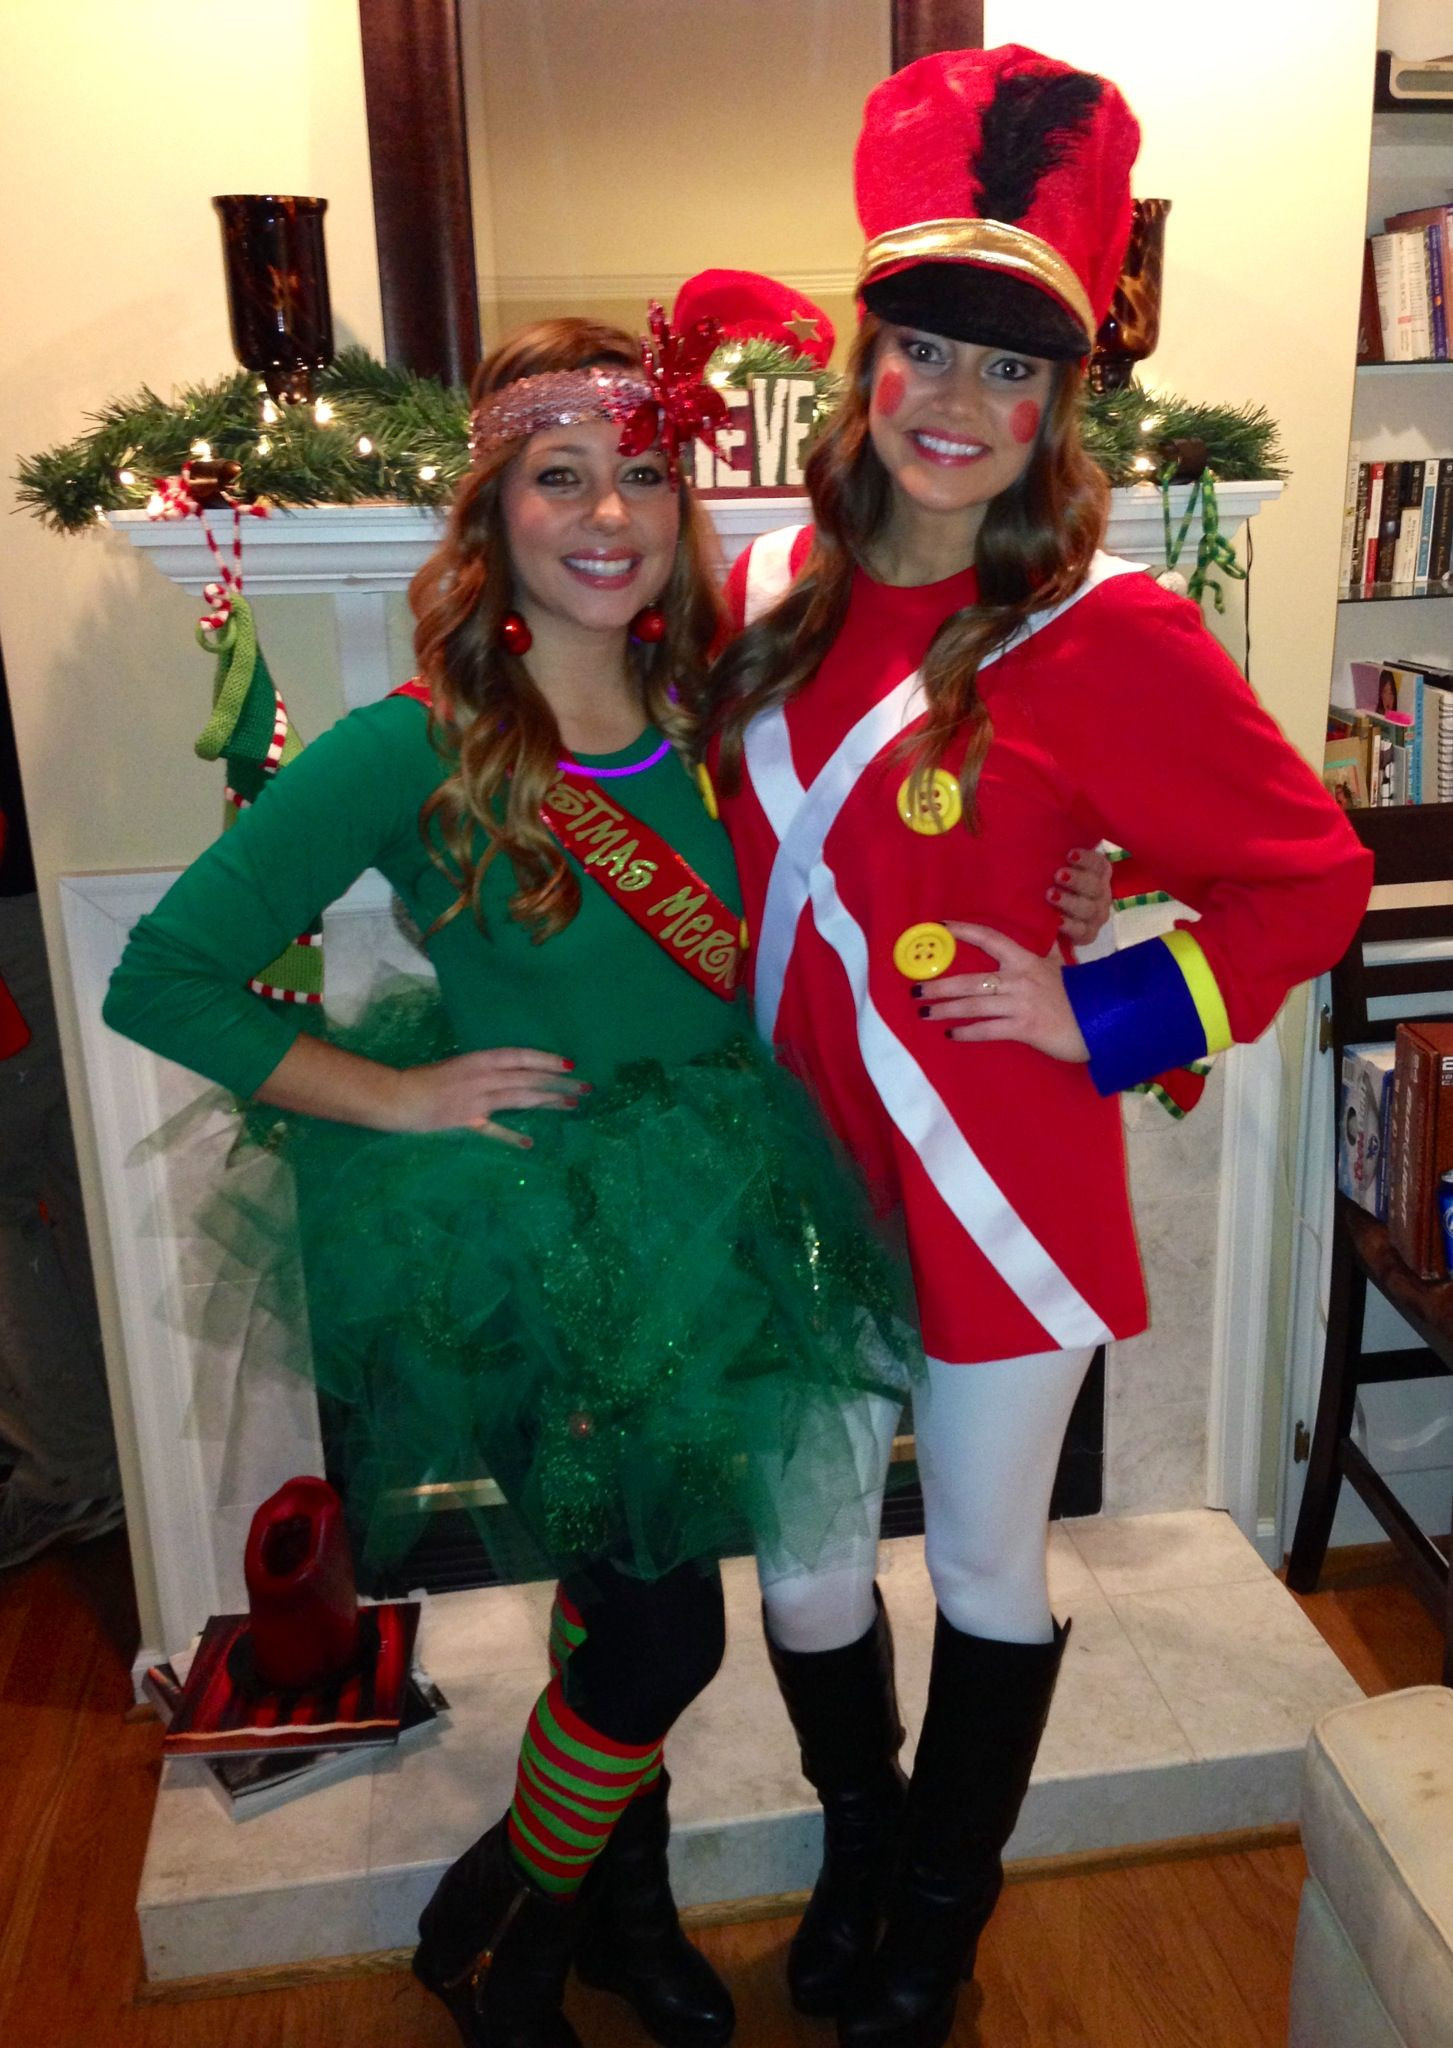 Tacky Christmas Outfit Ideas
 Fun Christmas party outfits